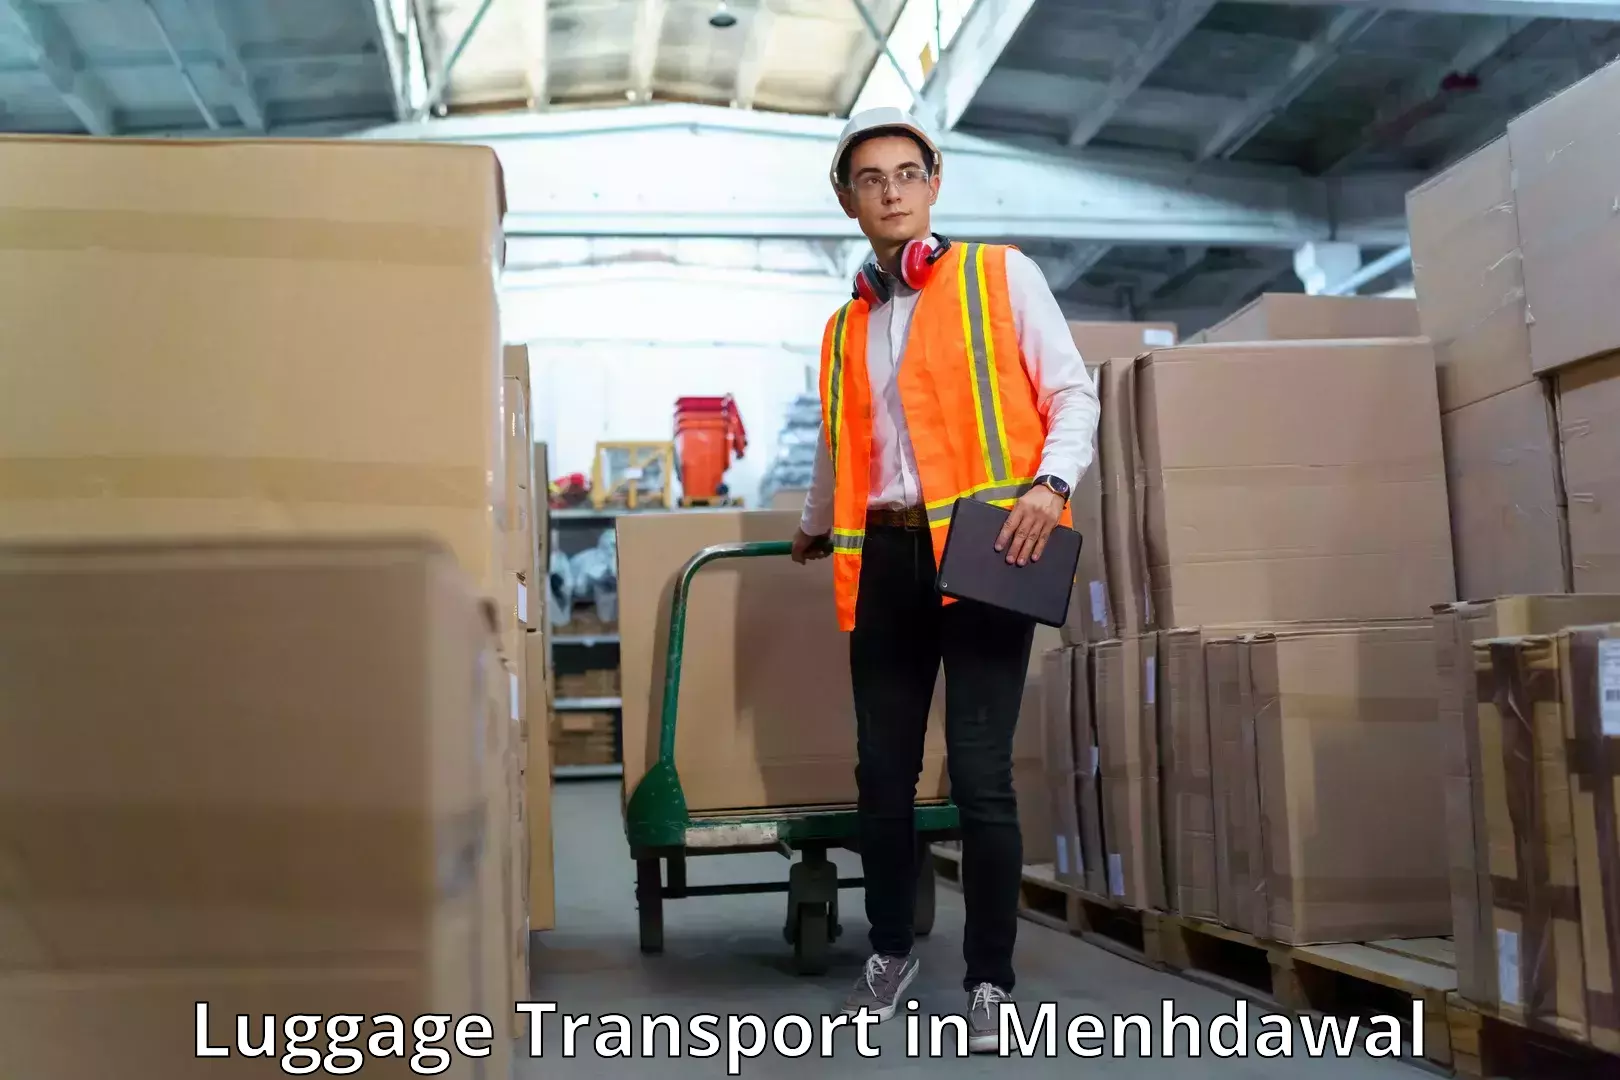 Luggage shipping guide in Menhdawal